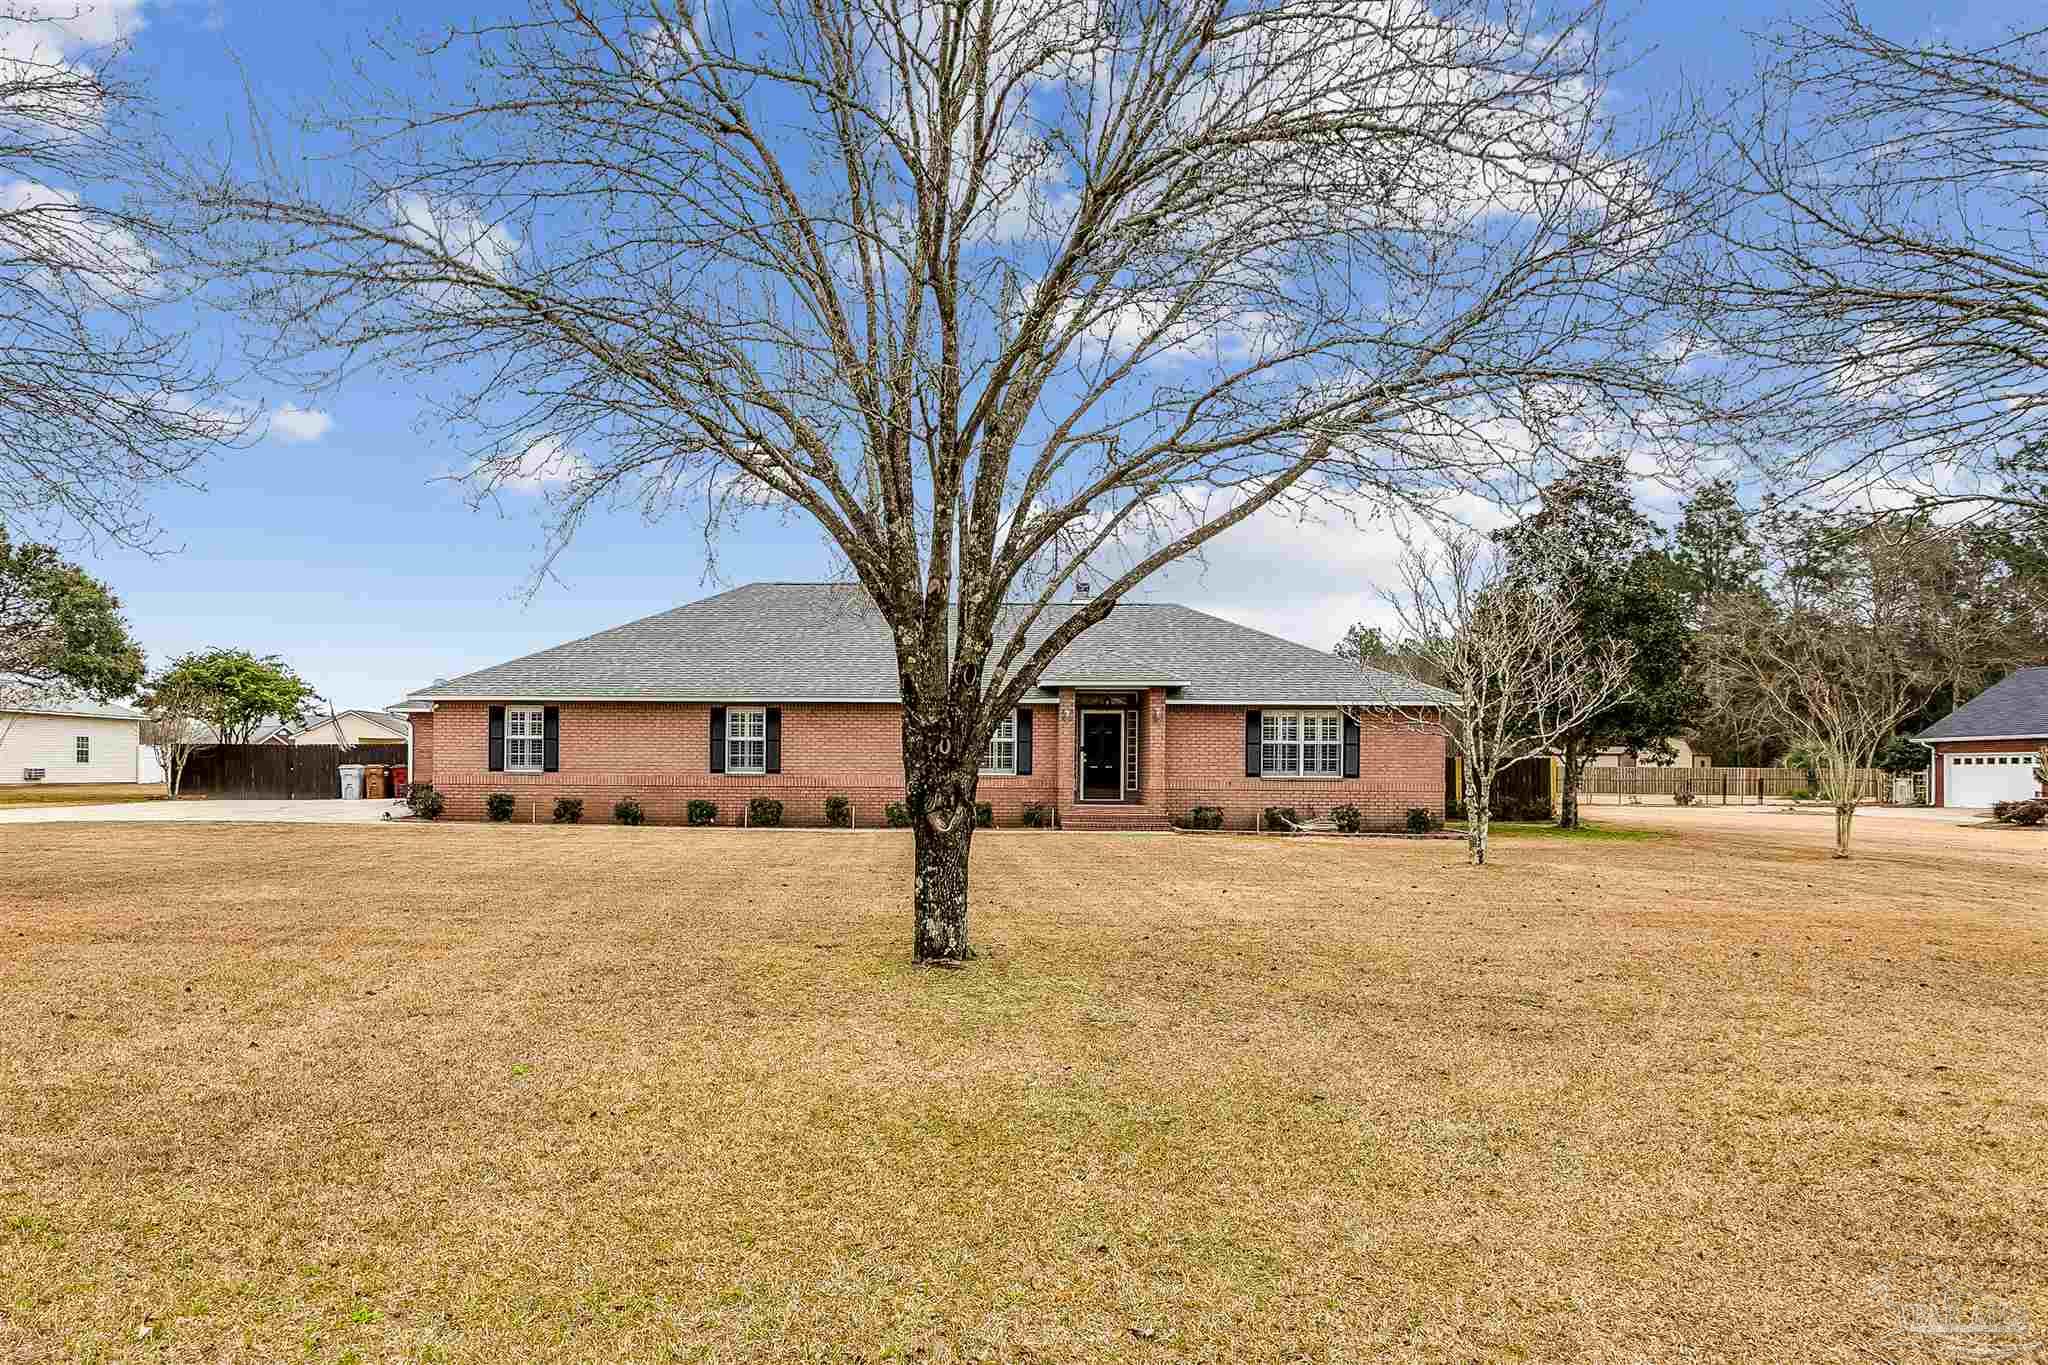 6116 Curtis Rd, Pace FL 32571, Property Listing #584130,